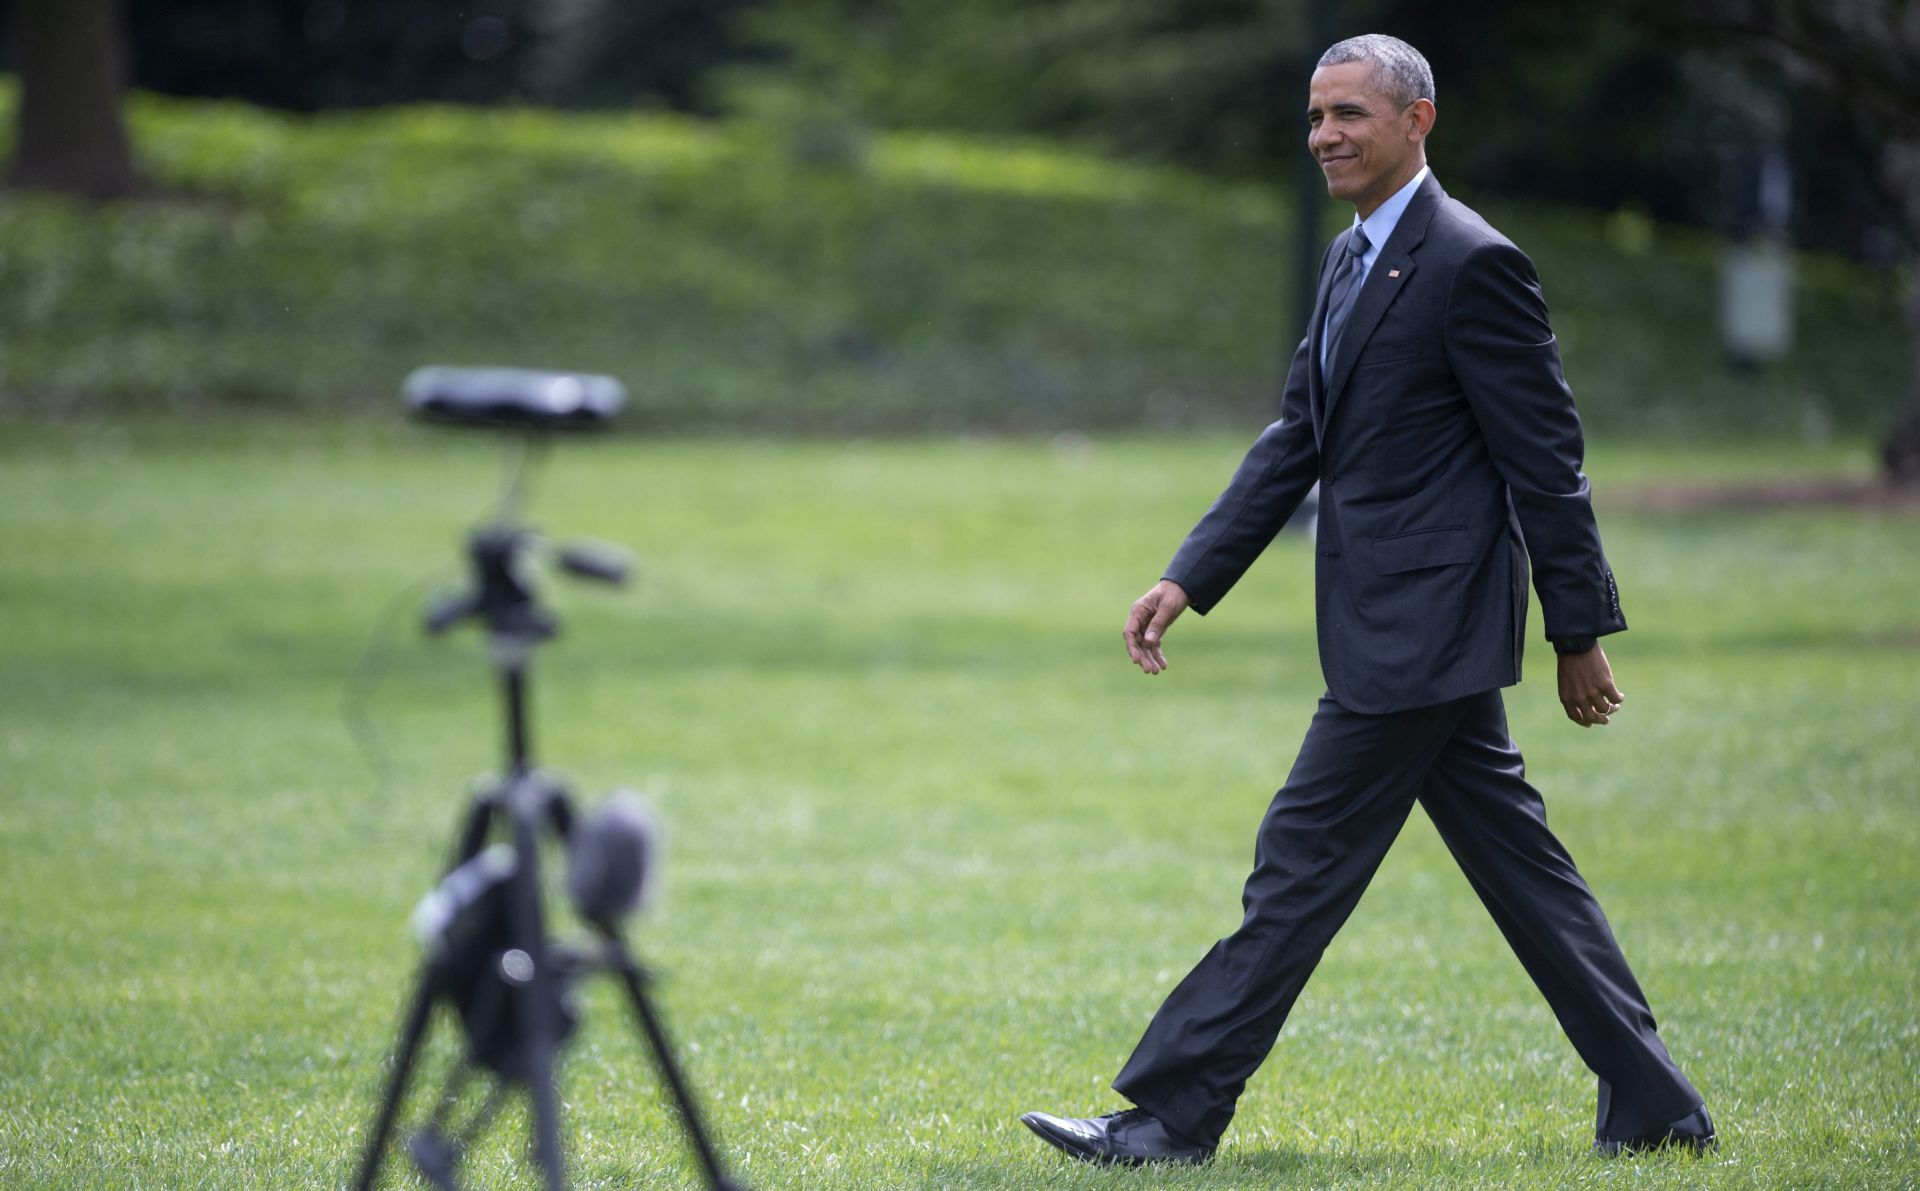 epa05267670 US President Barack Obama walks near a 360 degree camera to Marine One on the South Lawn of the White House in Washington, DC, USA, 19 April 2016. President Obama is traveling on an international trip to include stops in Saudi Arabia, Germany and Britain.  EPA/SHAWN THEW